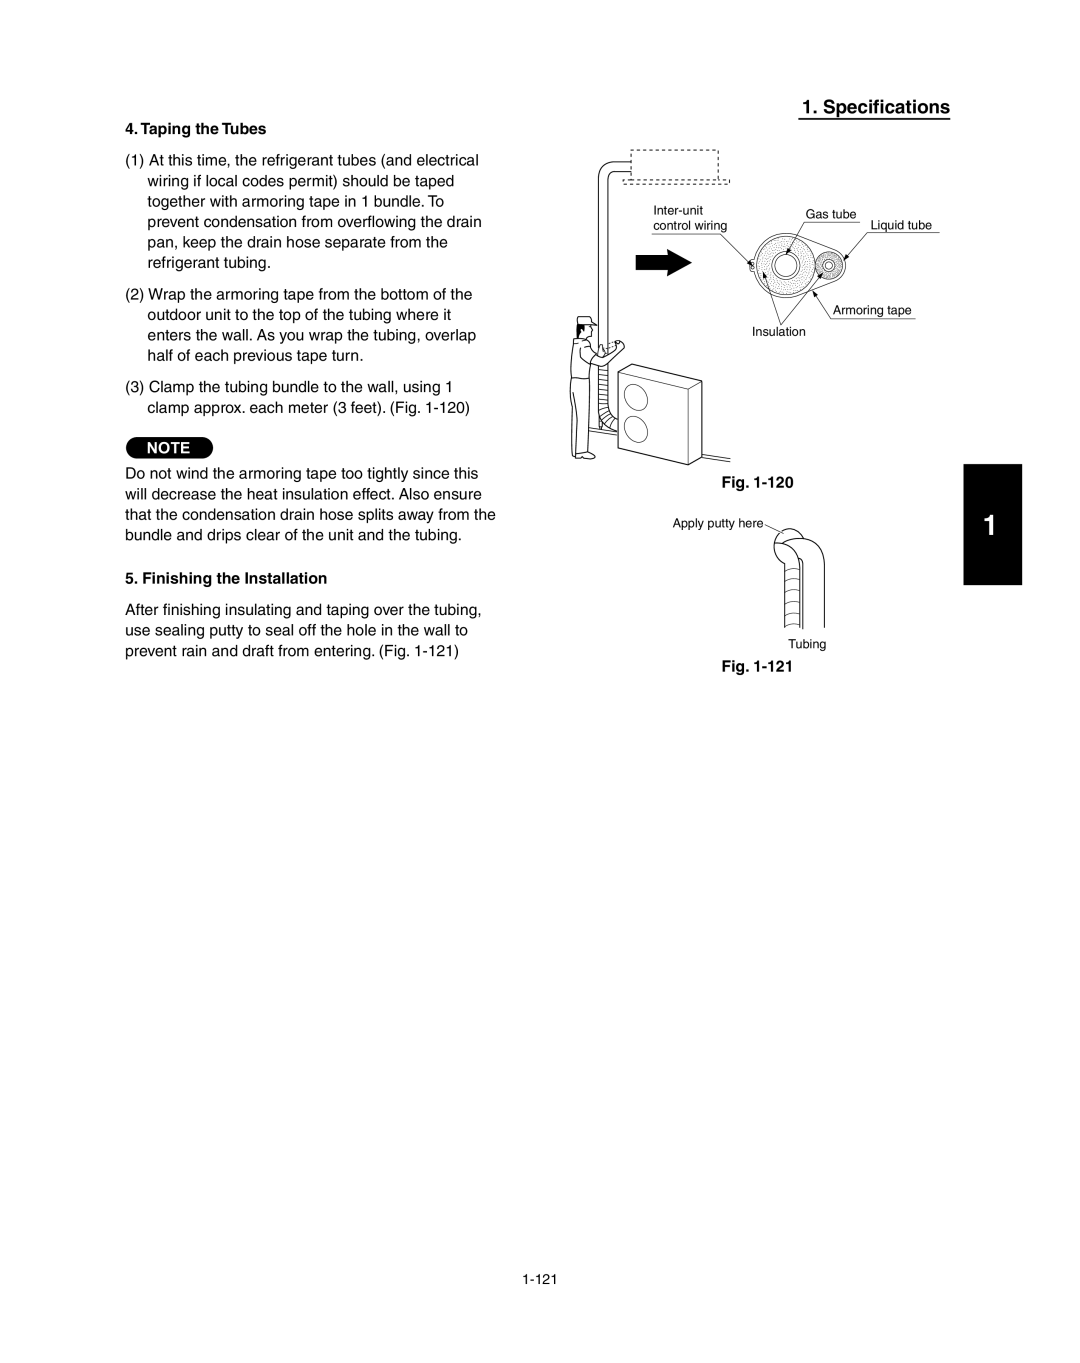 Panasonic R410A service manual Specifications, Taping the Tubes, Finishing the Installation, Fig 